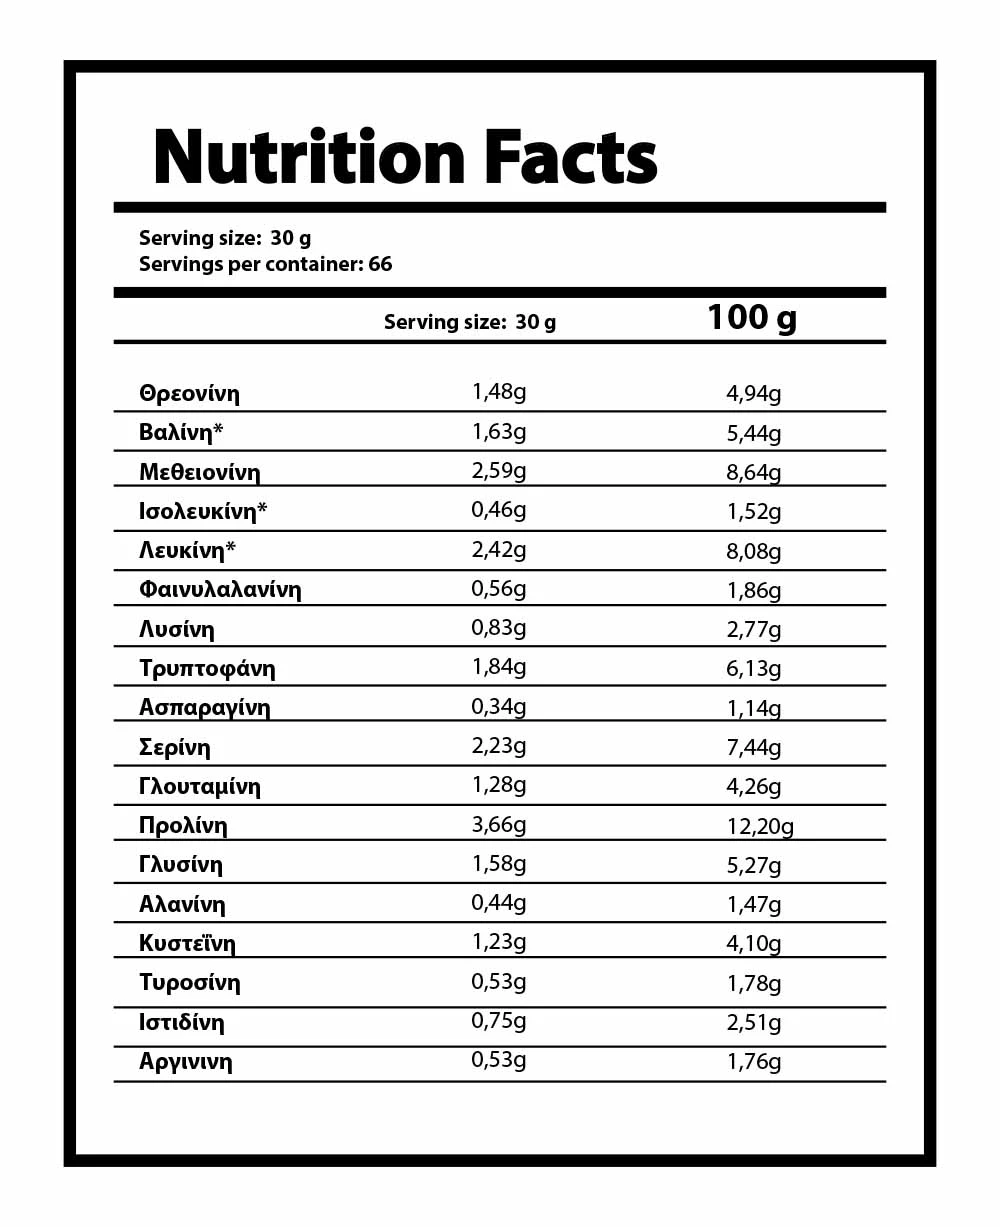 01-IN-0025 Nutrition Facts